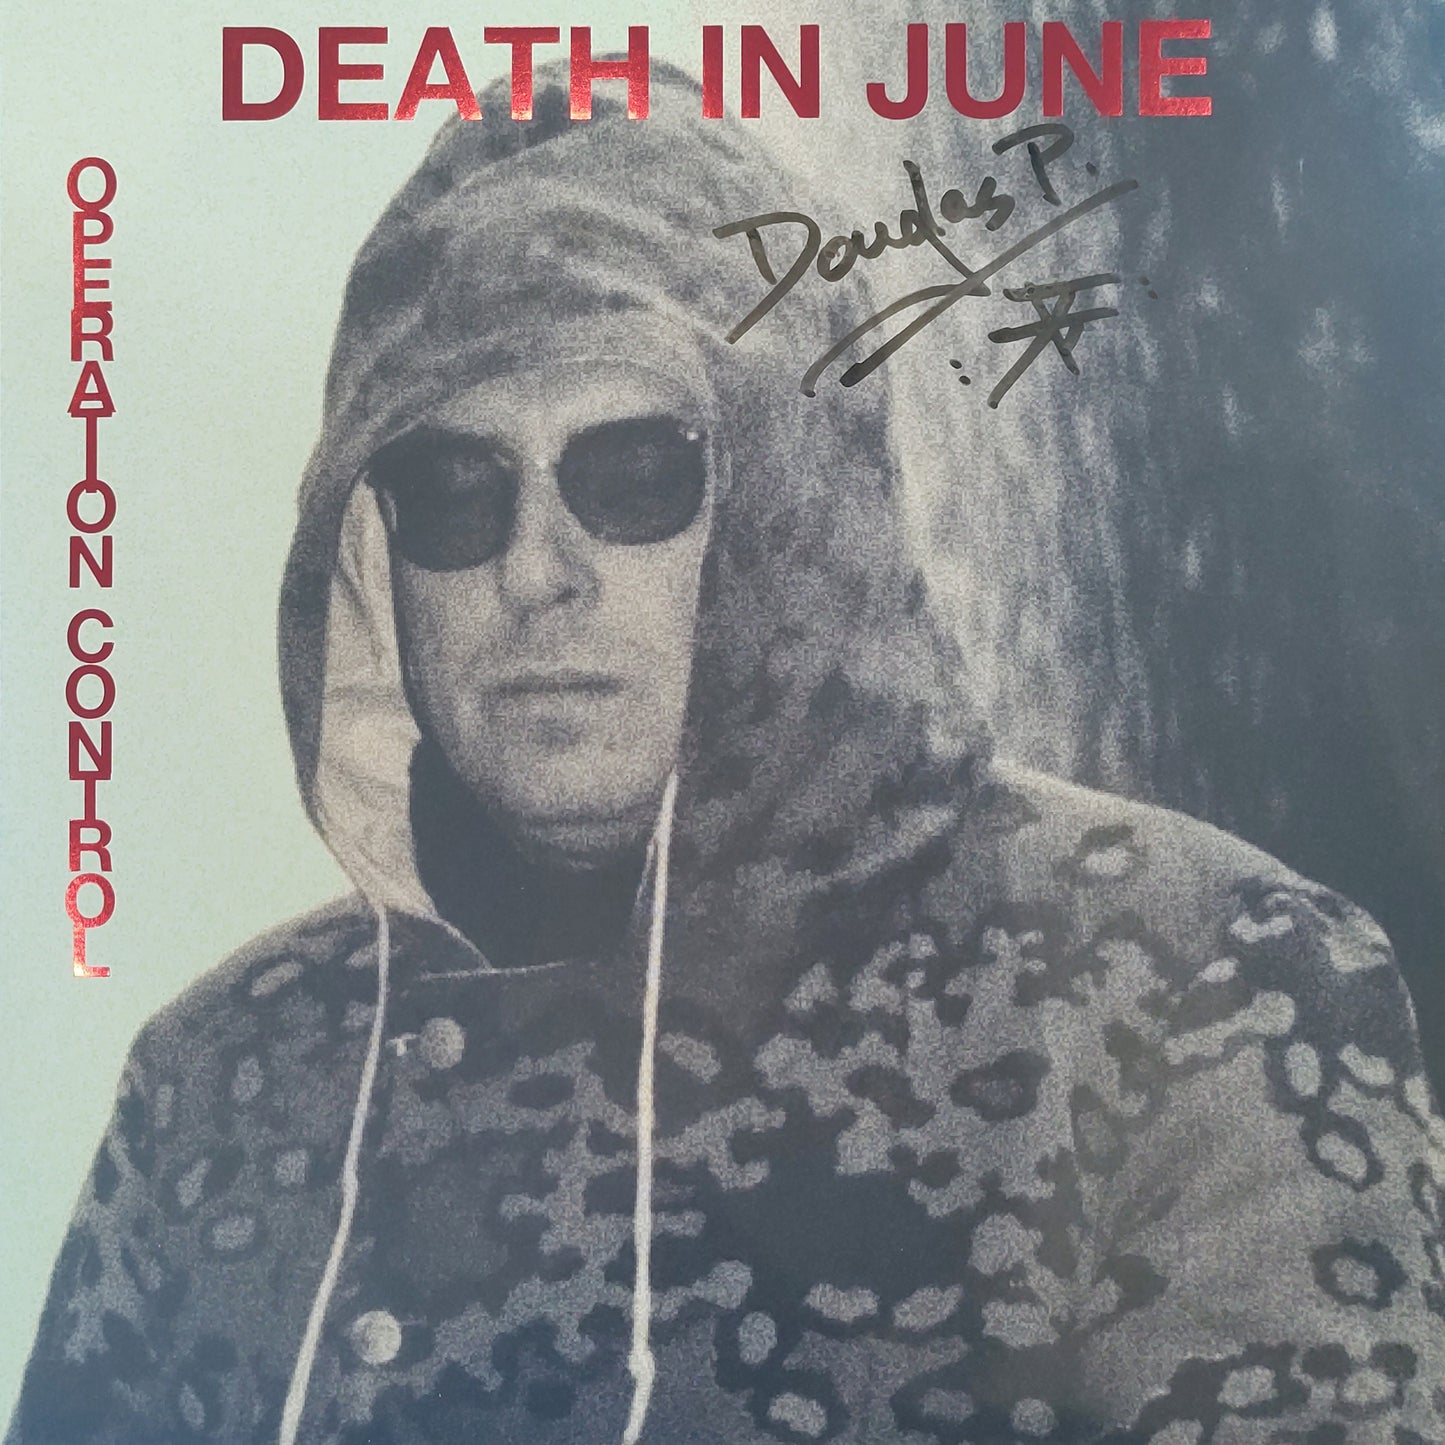 DEATH IN JUNE - "OPERATION CONTROL" 2xLP *SIGNED*